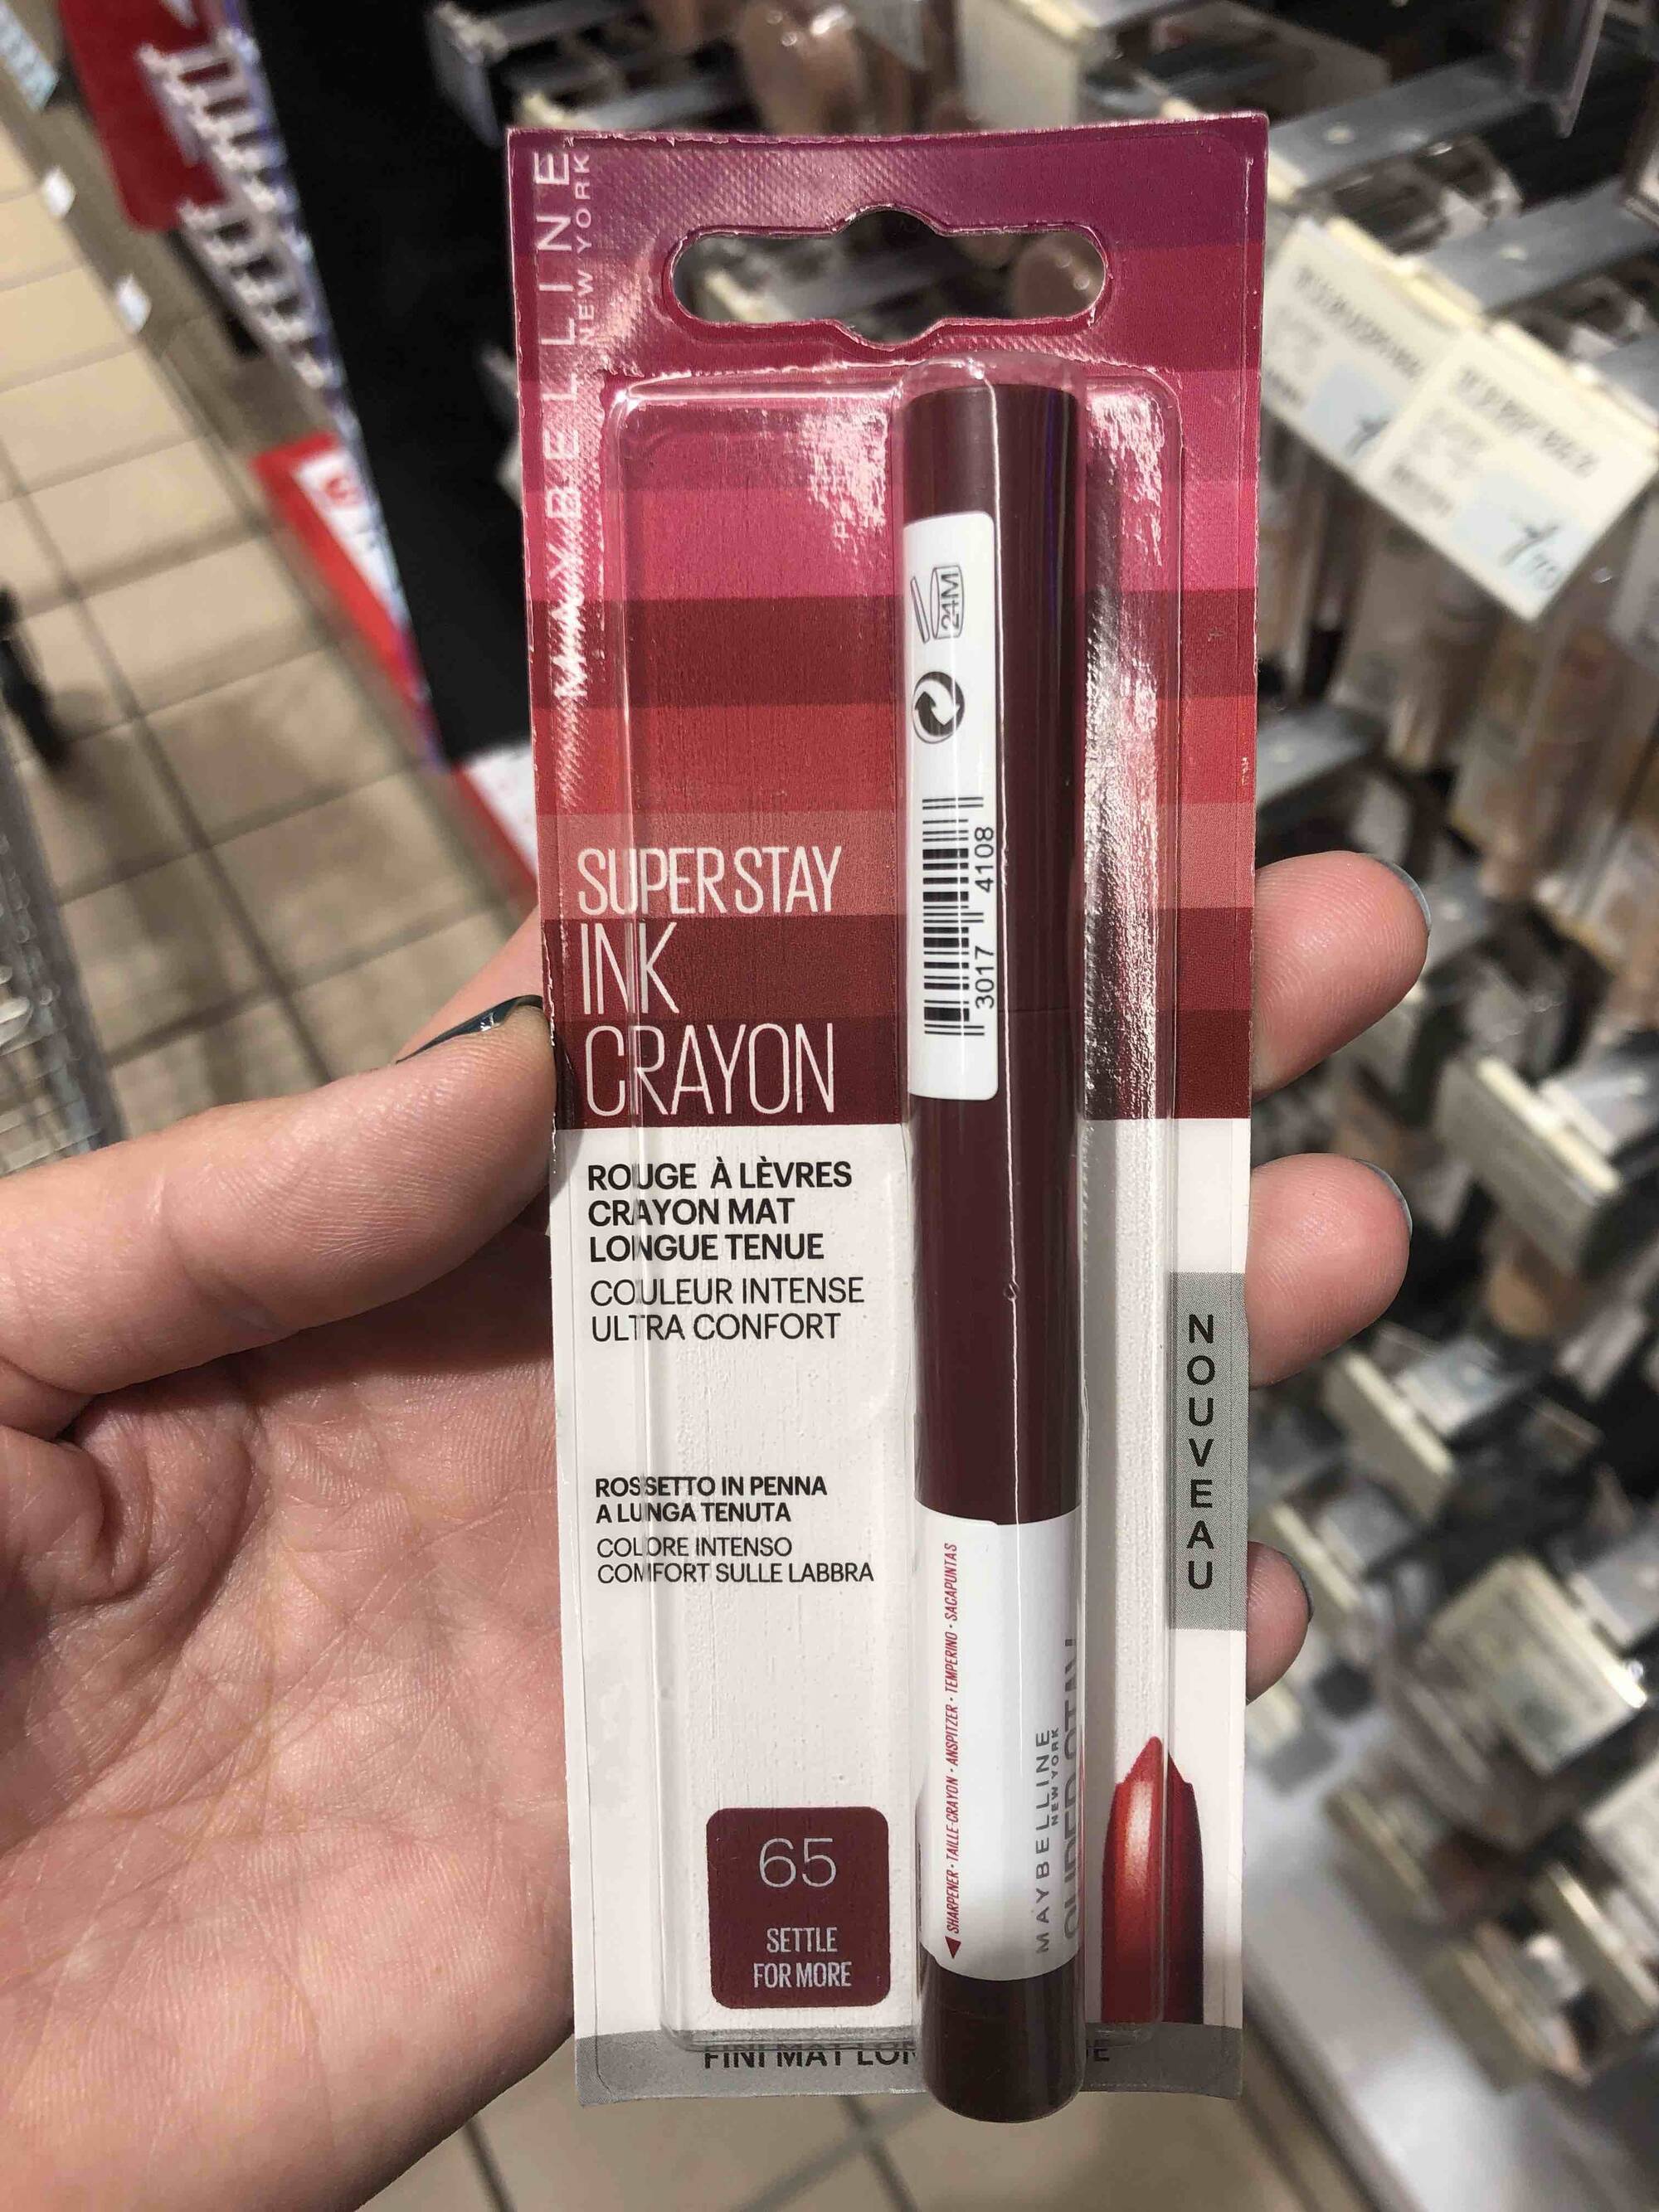 MAYBELLINE NEW YORK - Superstay ink crayon - Rouge à lèvres crayon mat